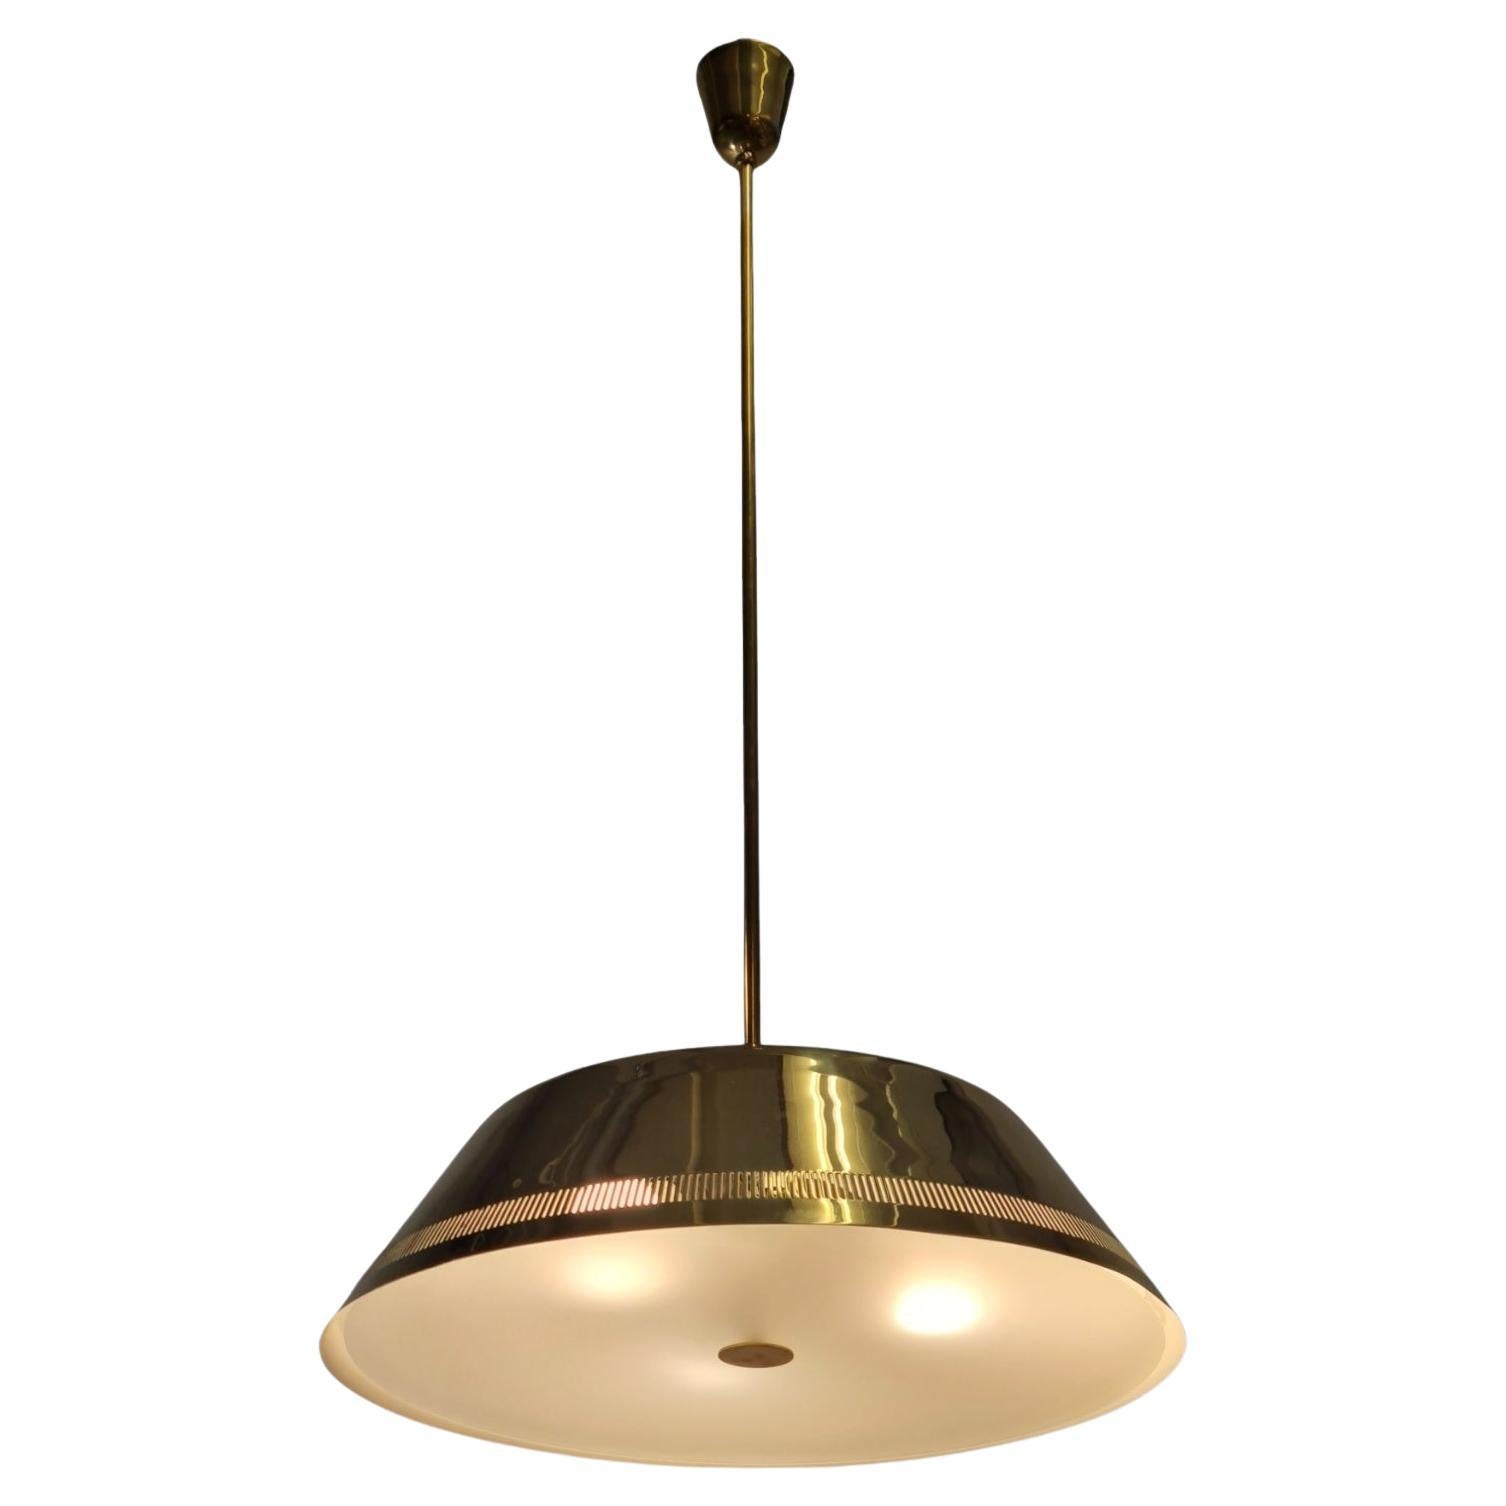 A Magnificent Paavo Tynell Ceiling Lamp Model 82500 for Idman, 1950s For Sale